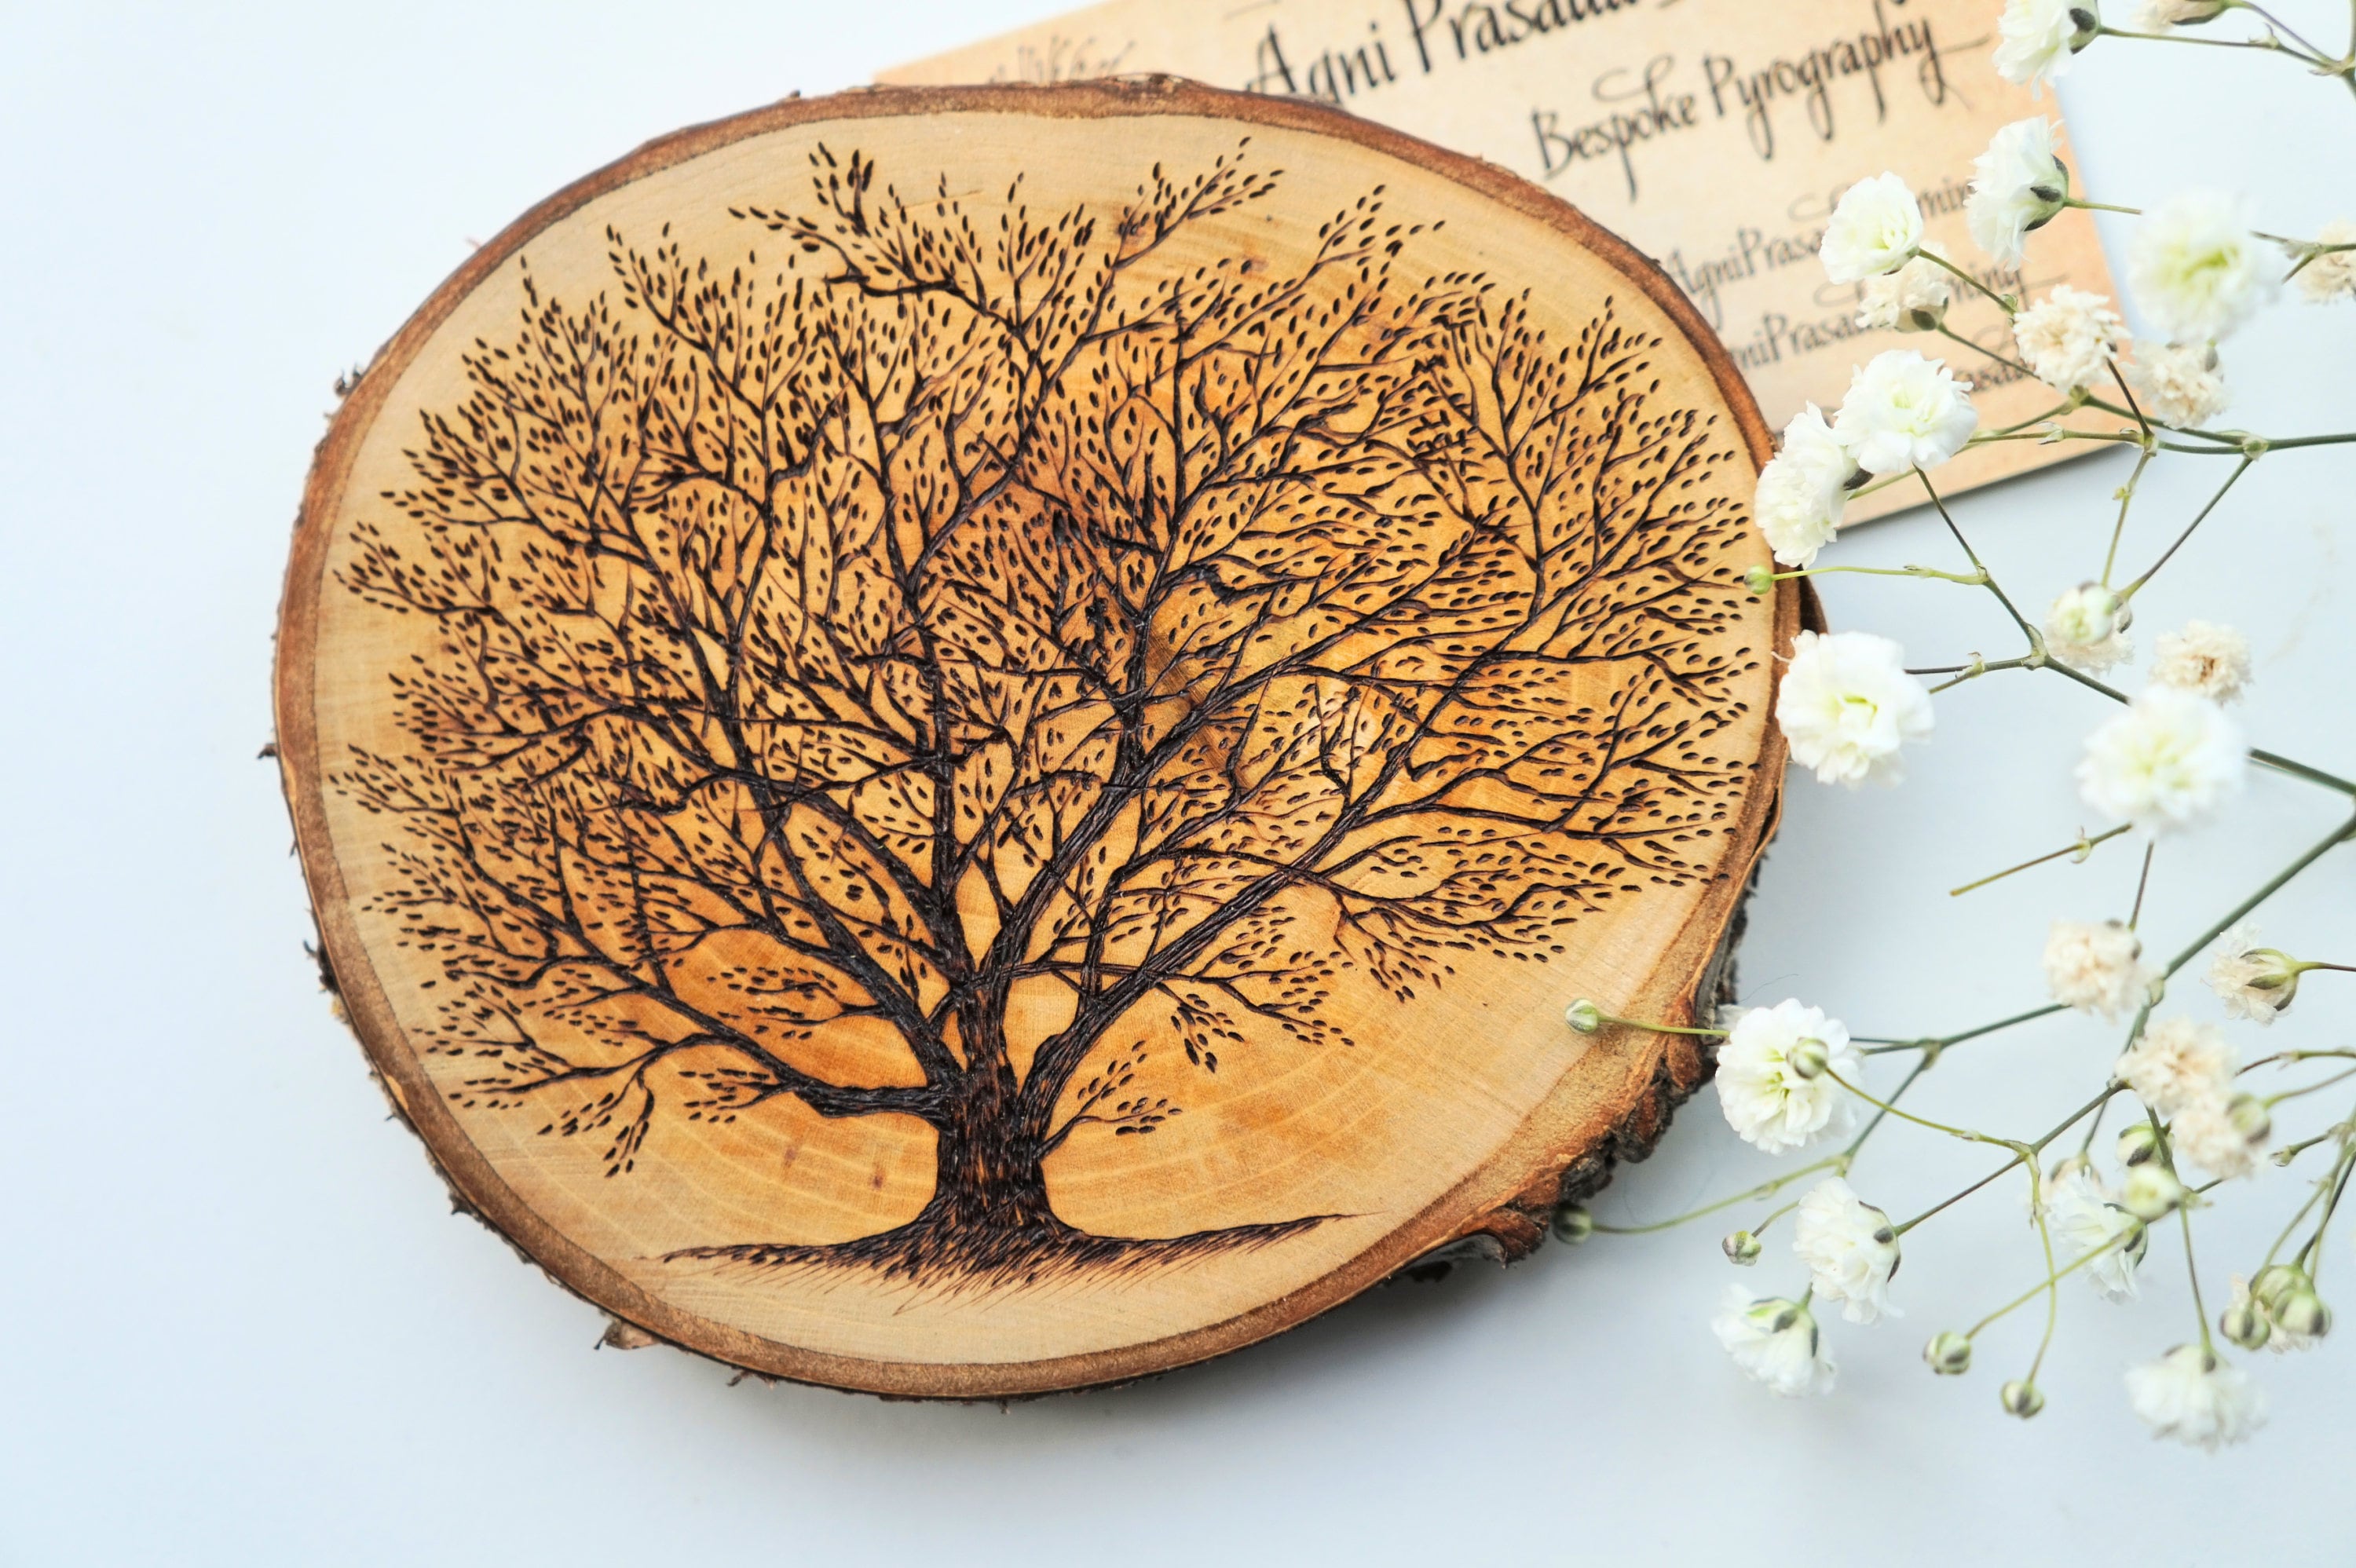 Pine Tree Wood Burning, Pyrography, Forest Scene, Trees, Woodland, Nature,  Gift, Wall Art, Home or Cabin Decor 